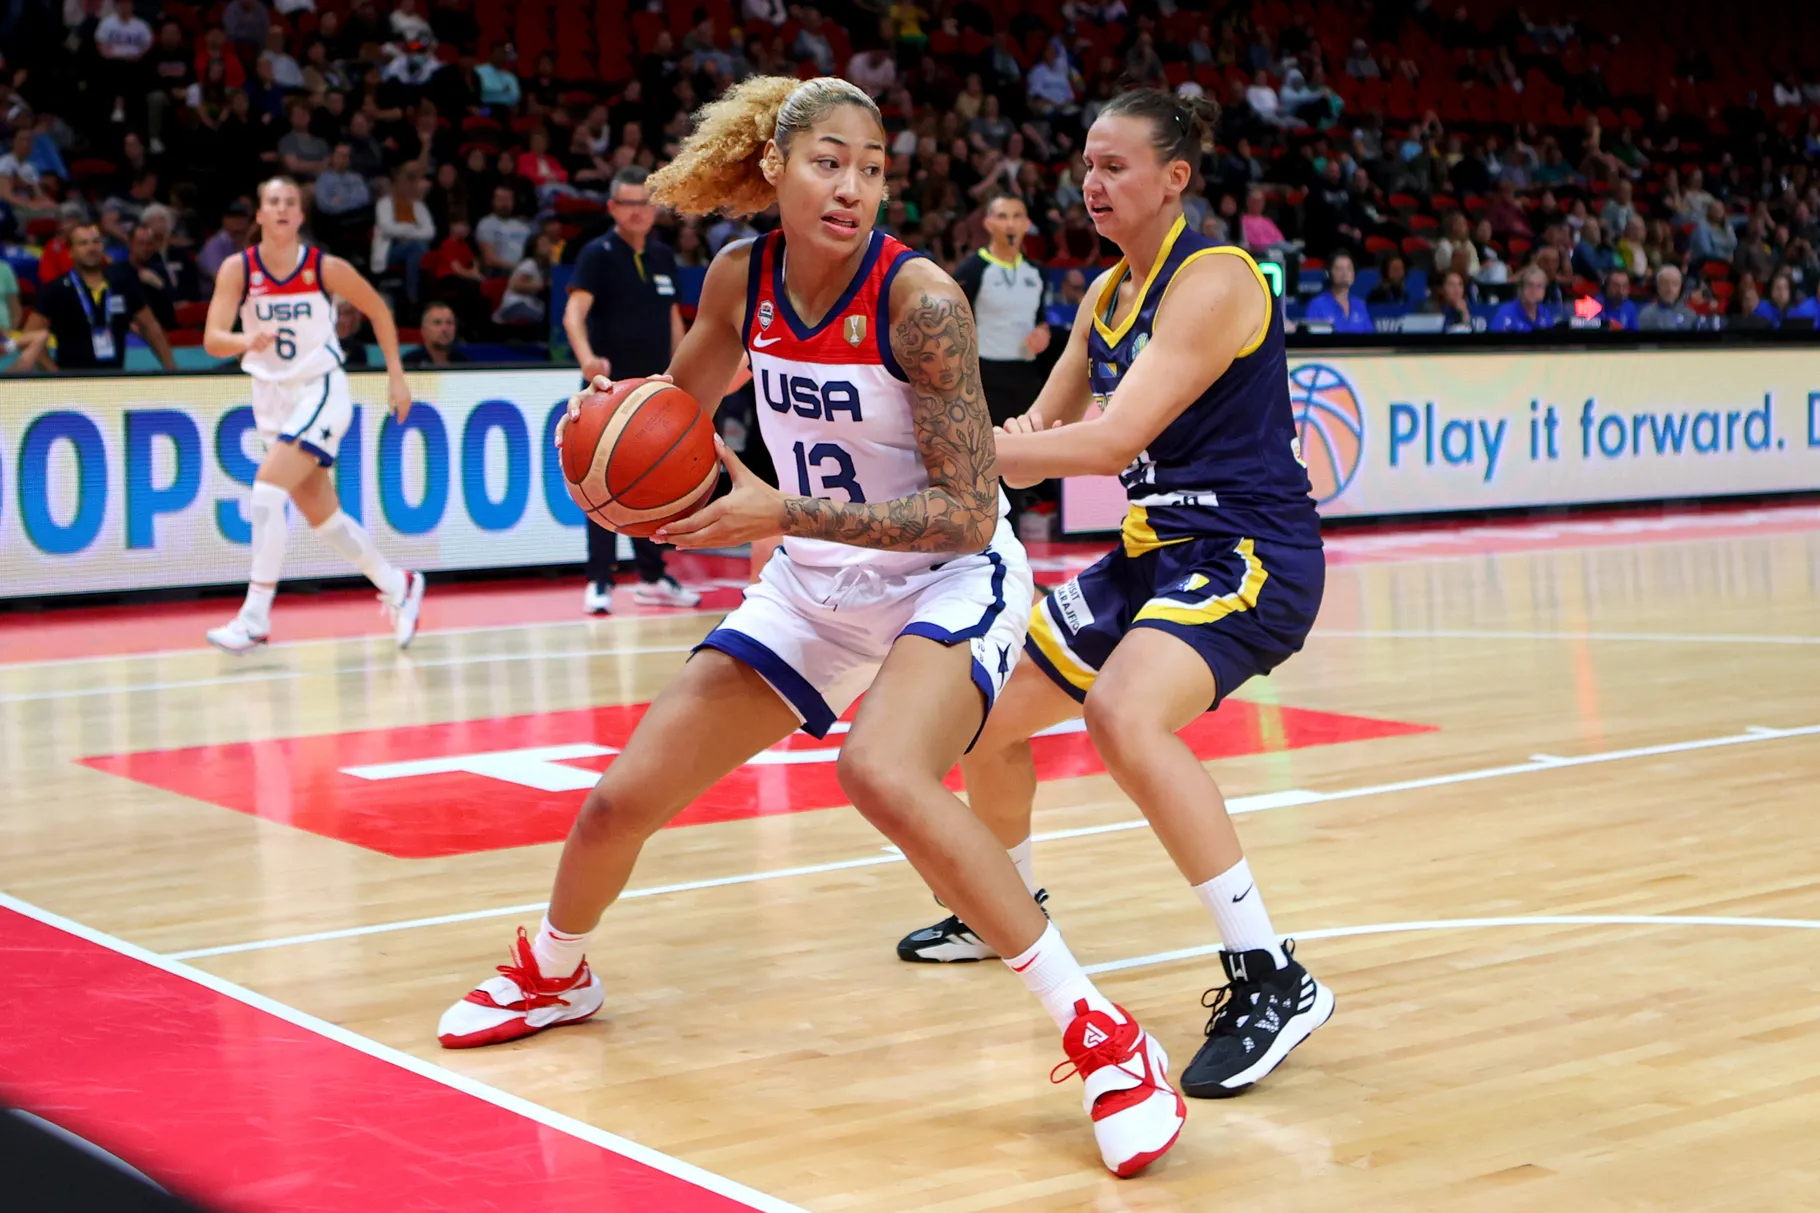 USA Women hoopsters continue to set records at 2022 FIBA Women’s World Cup